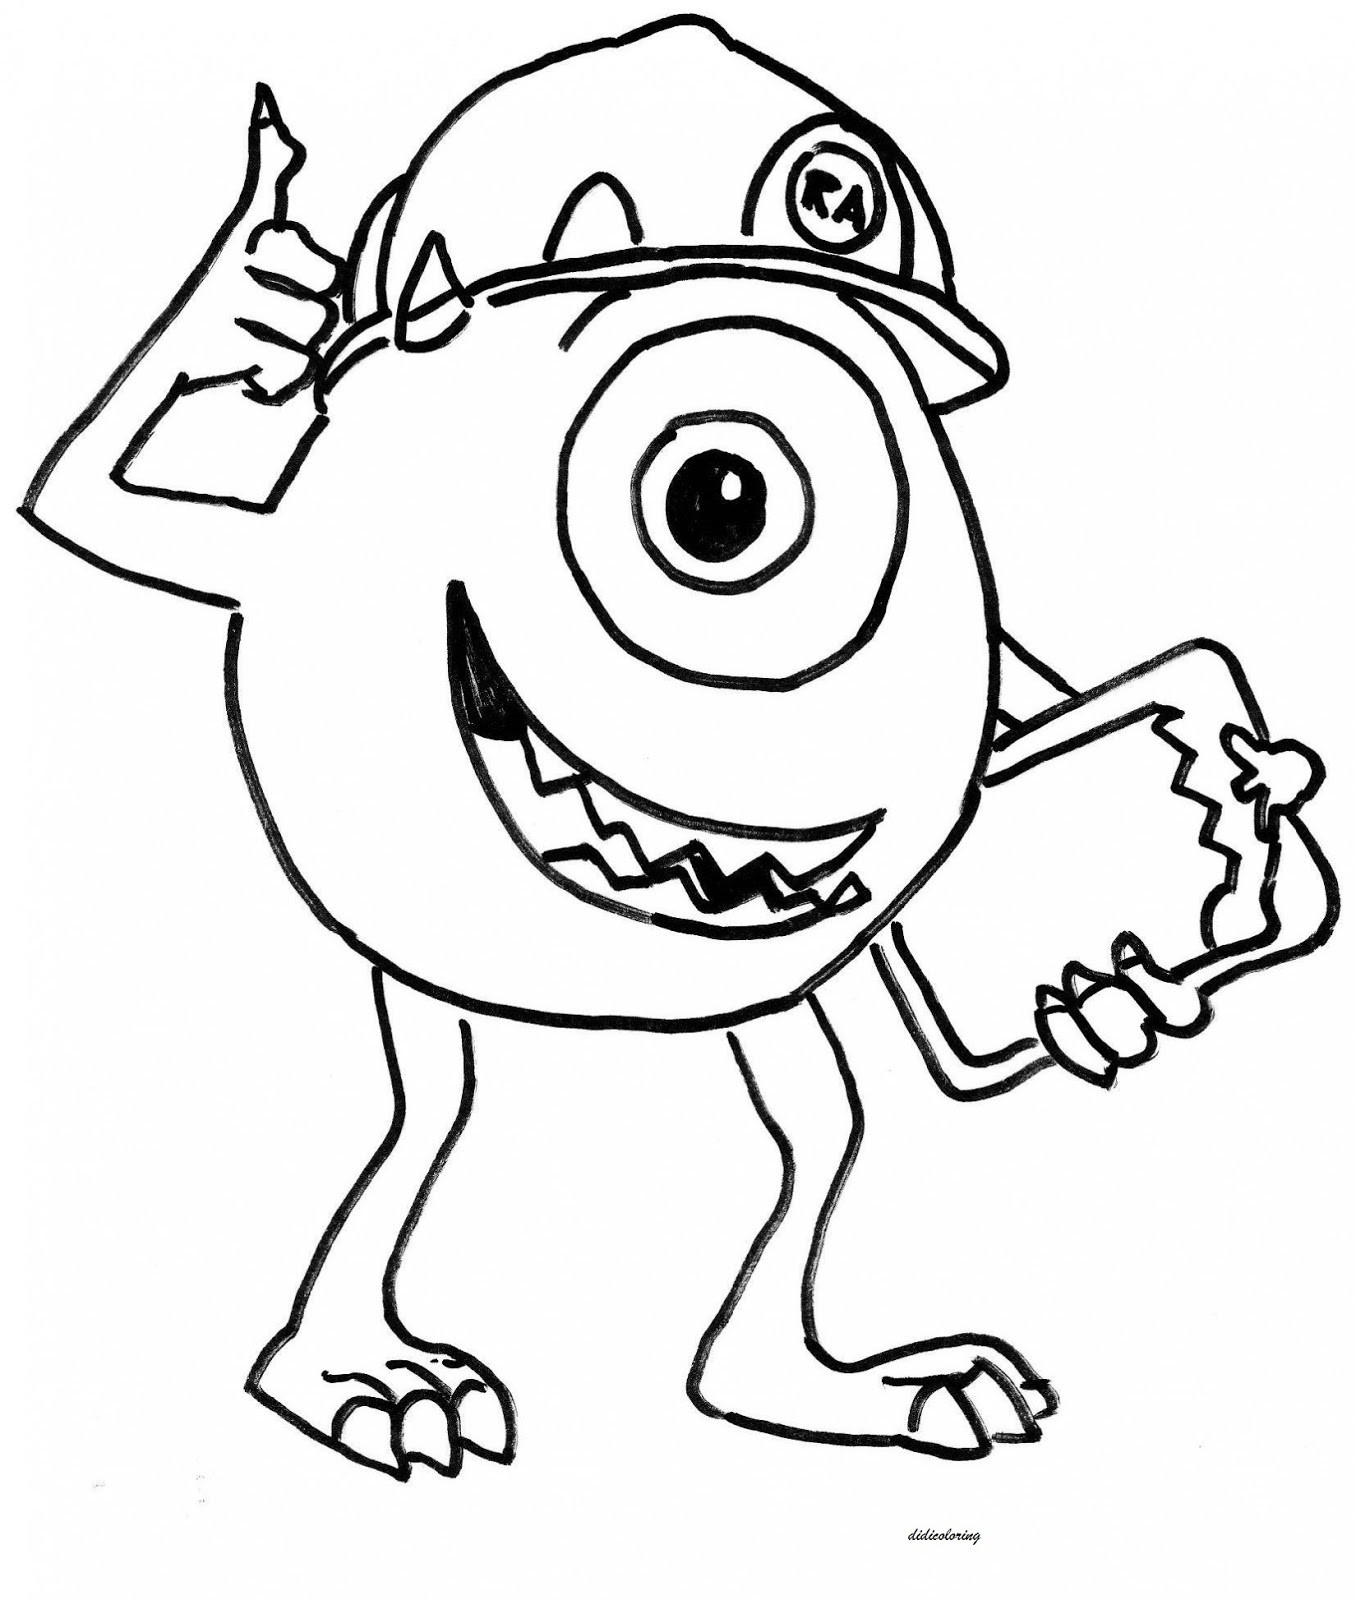 Printable Monster Coloring Pages
 dania rehman monster